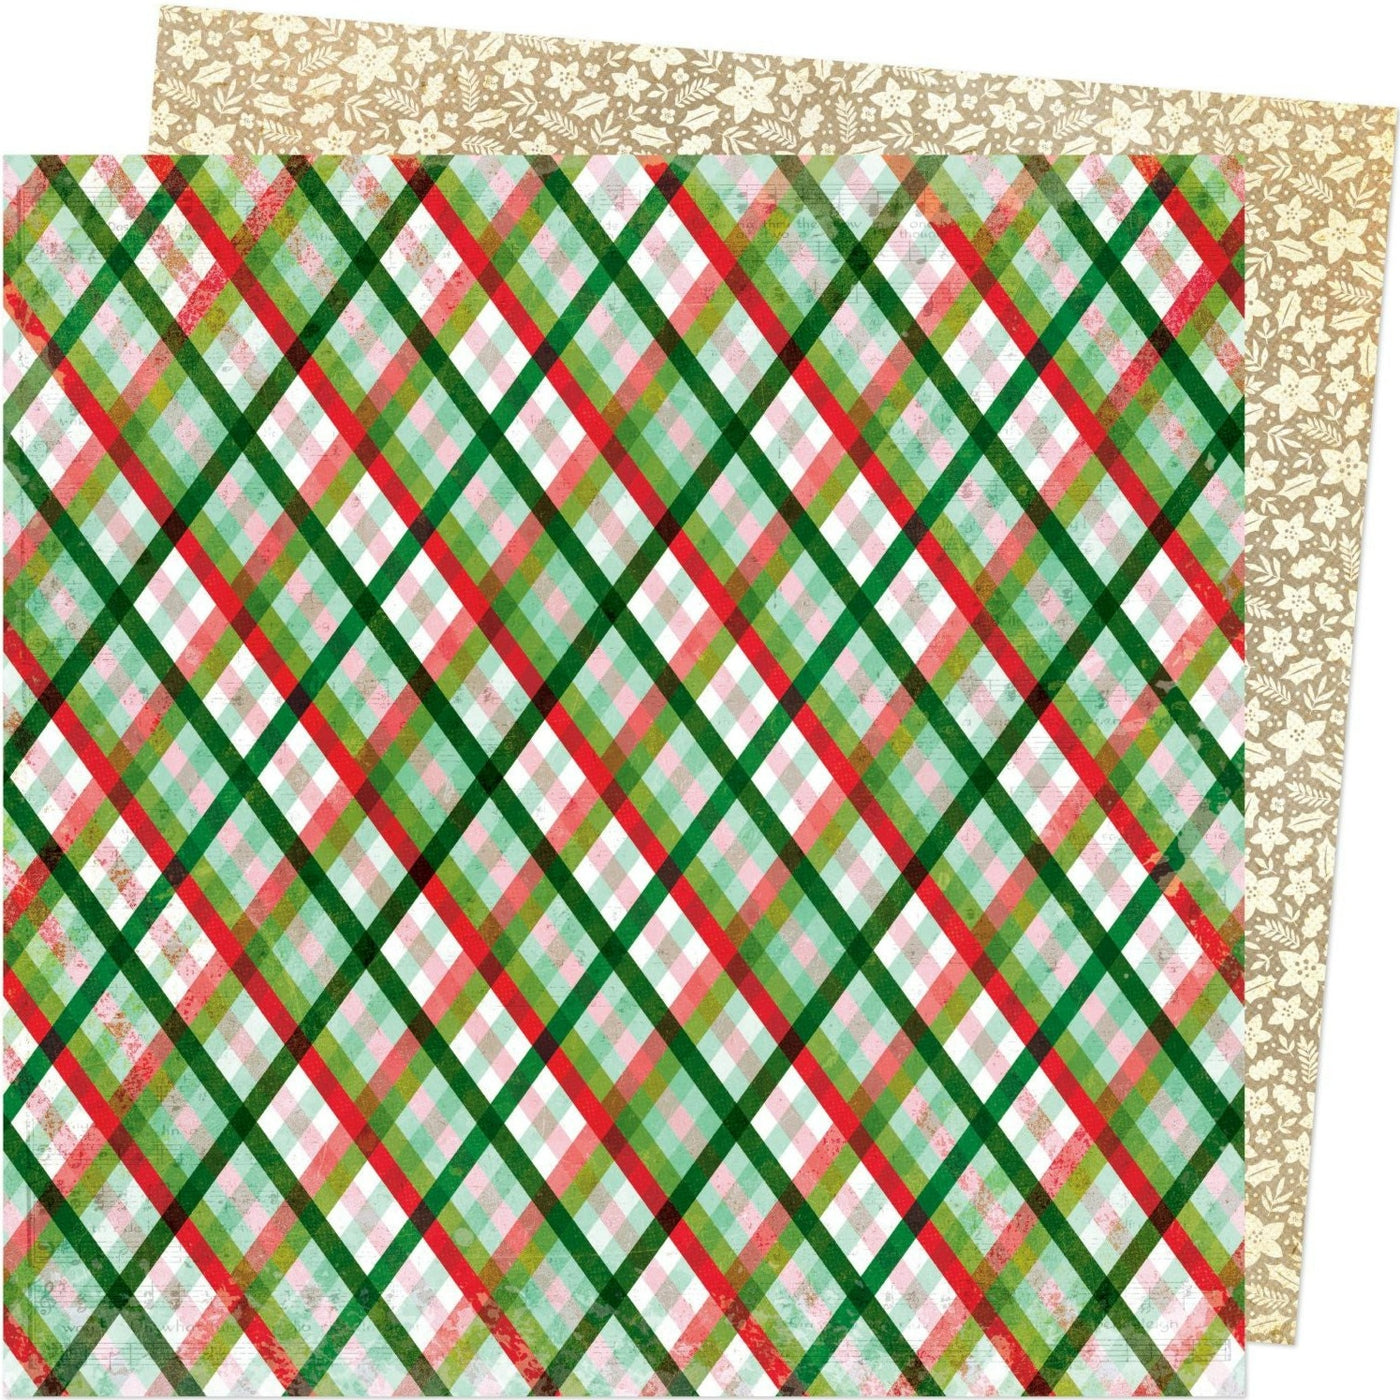 (Side A - green and red and white diagonal plaid, Side B - cream poinsettia and floral etchings on a kraft background)